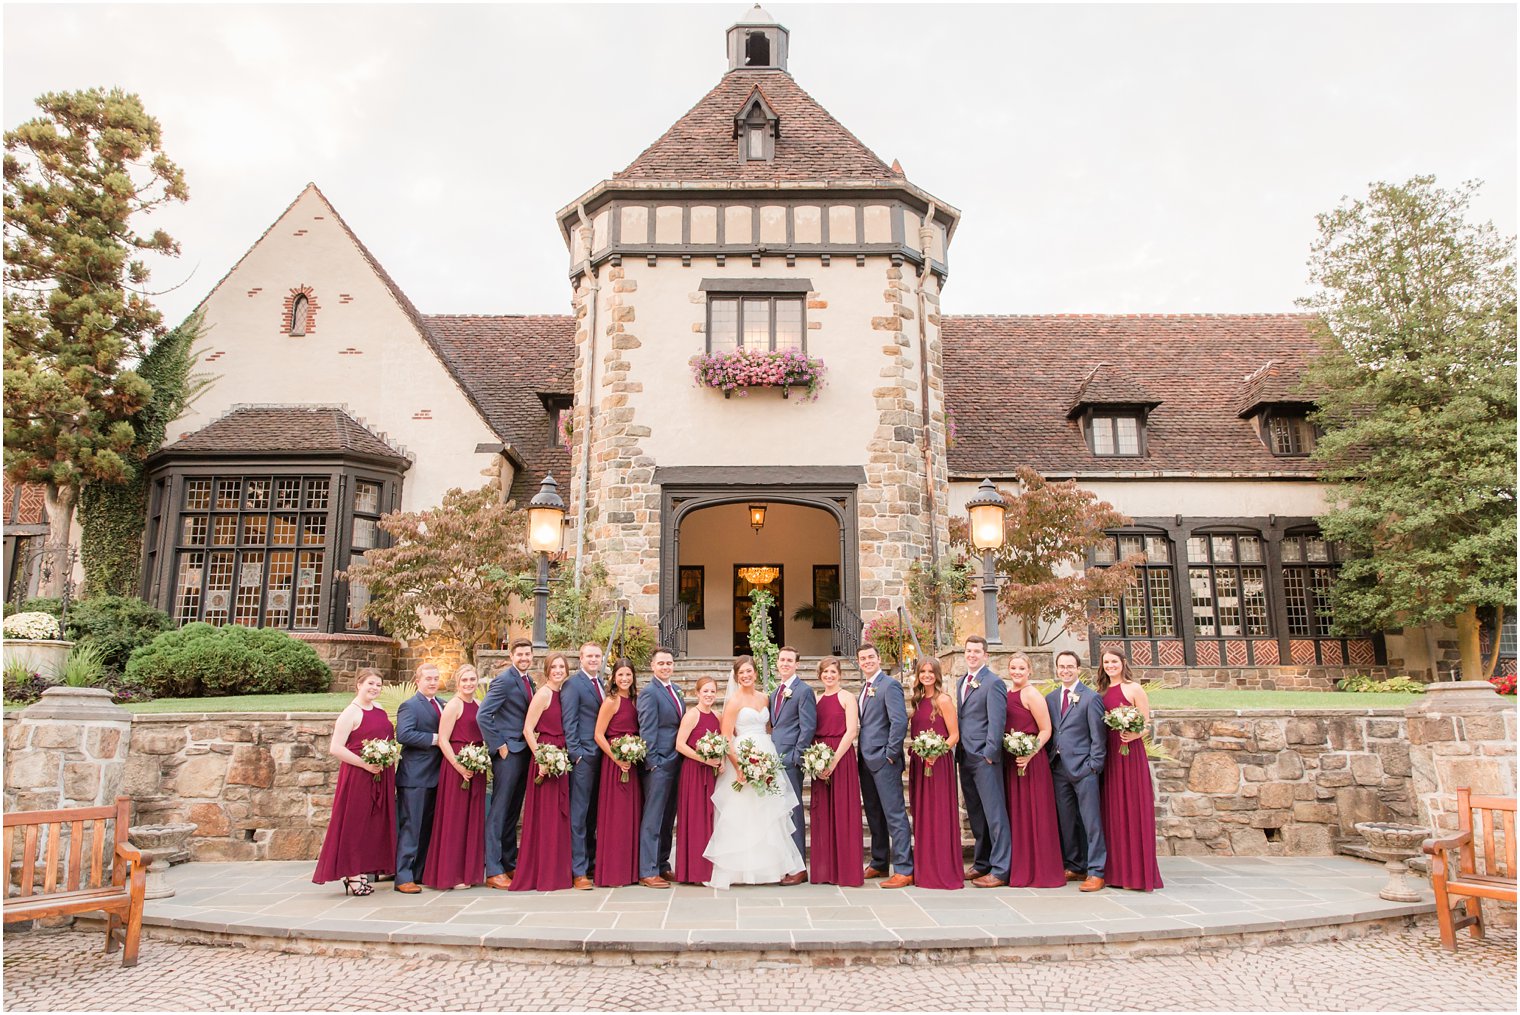 BHLDN bridesmaids dresses in burgundy | bridal party photo